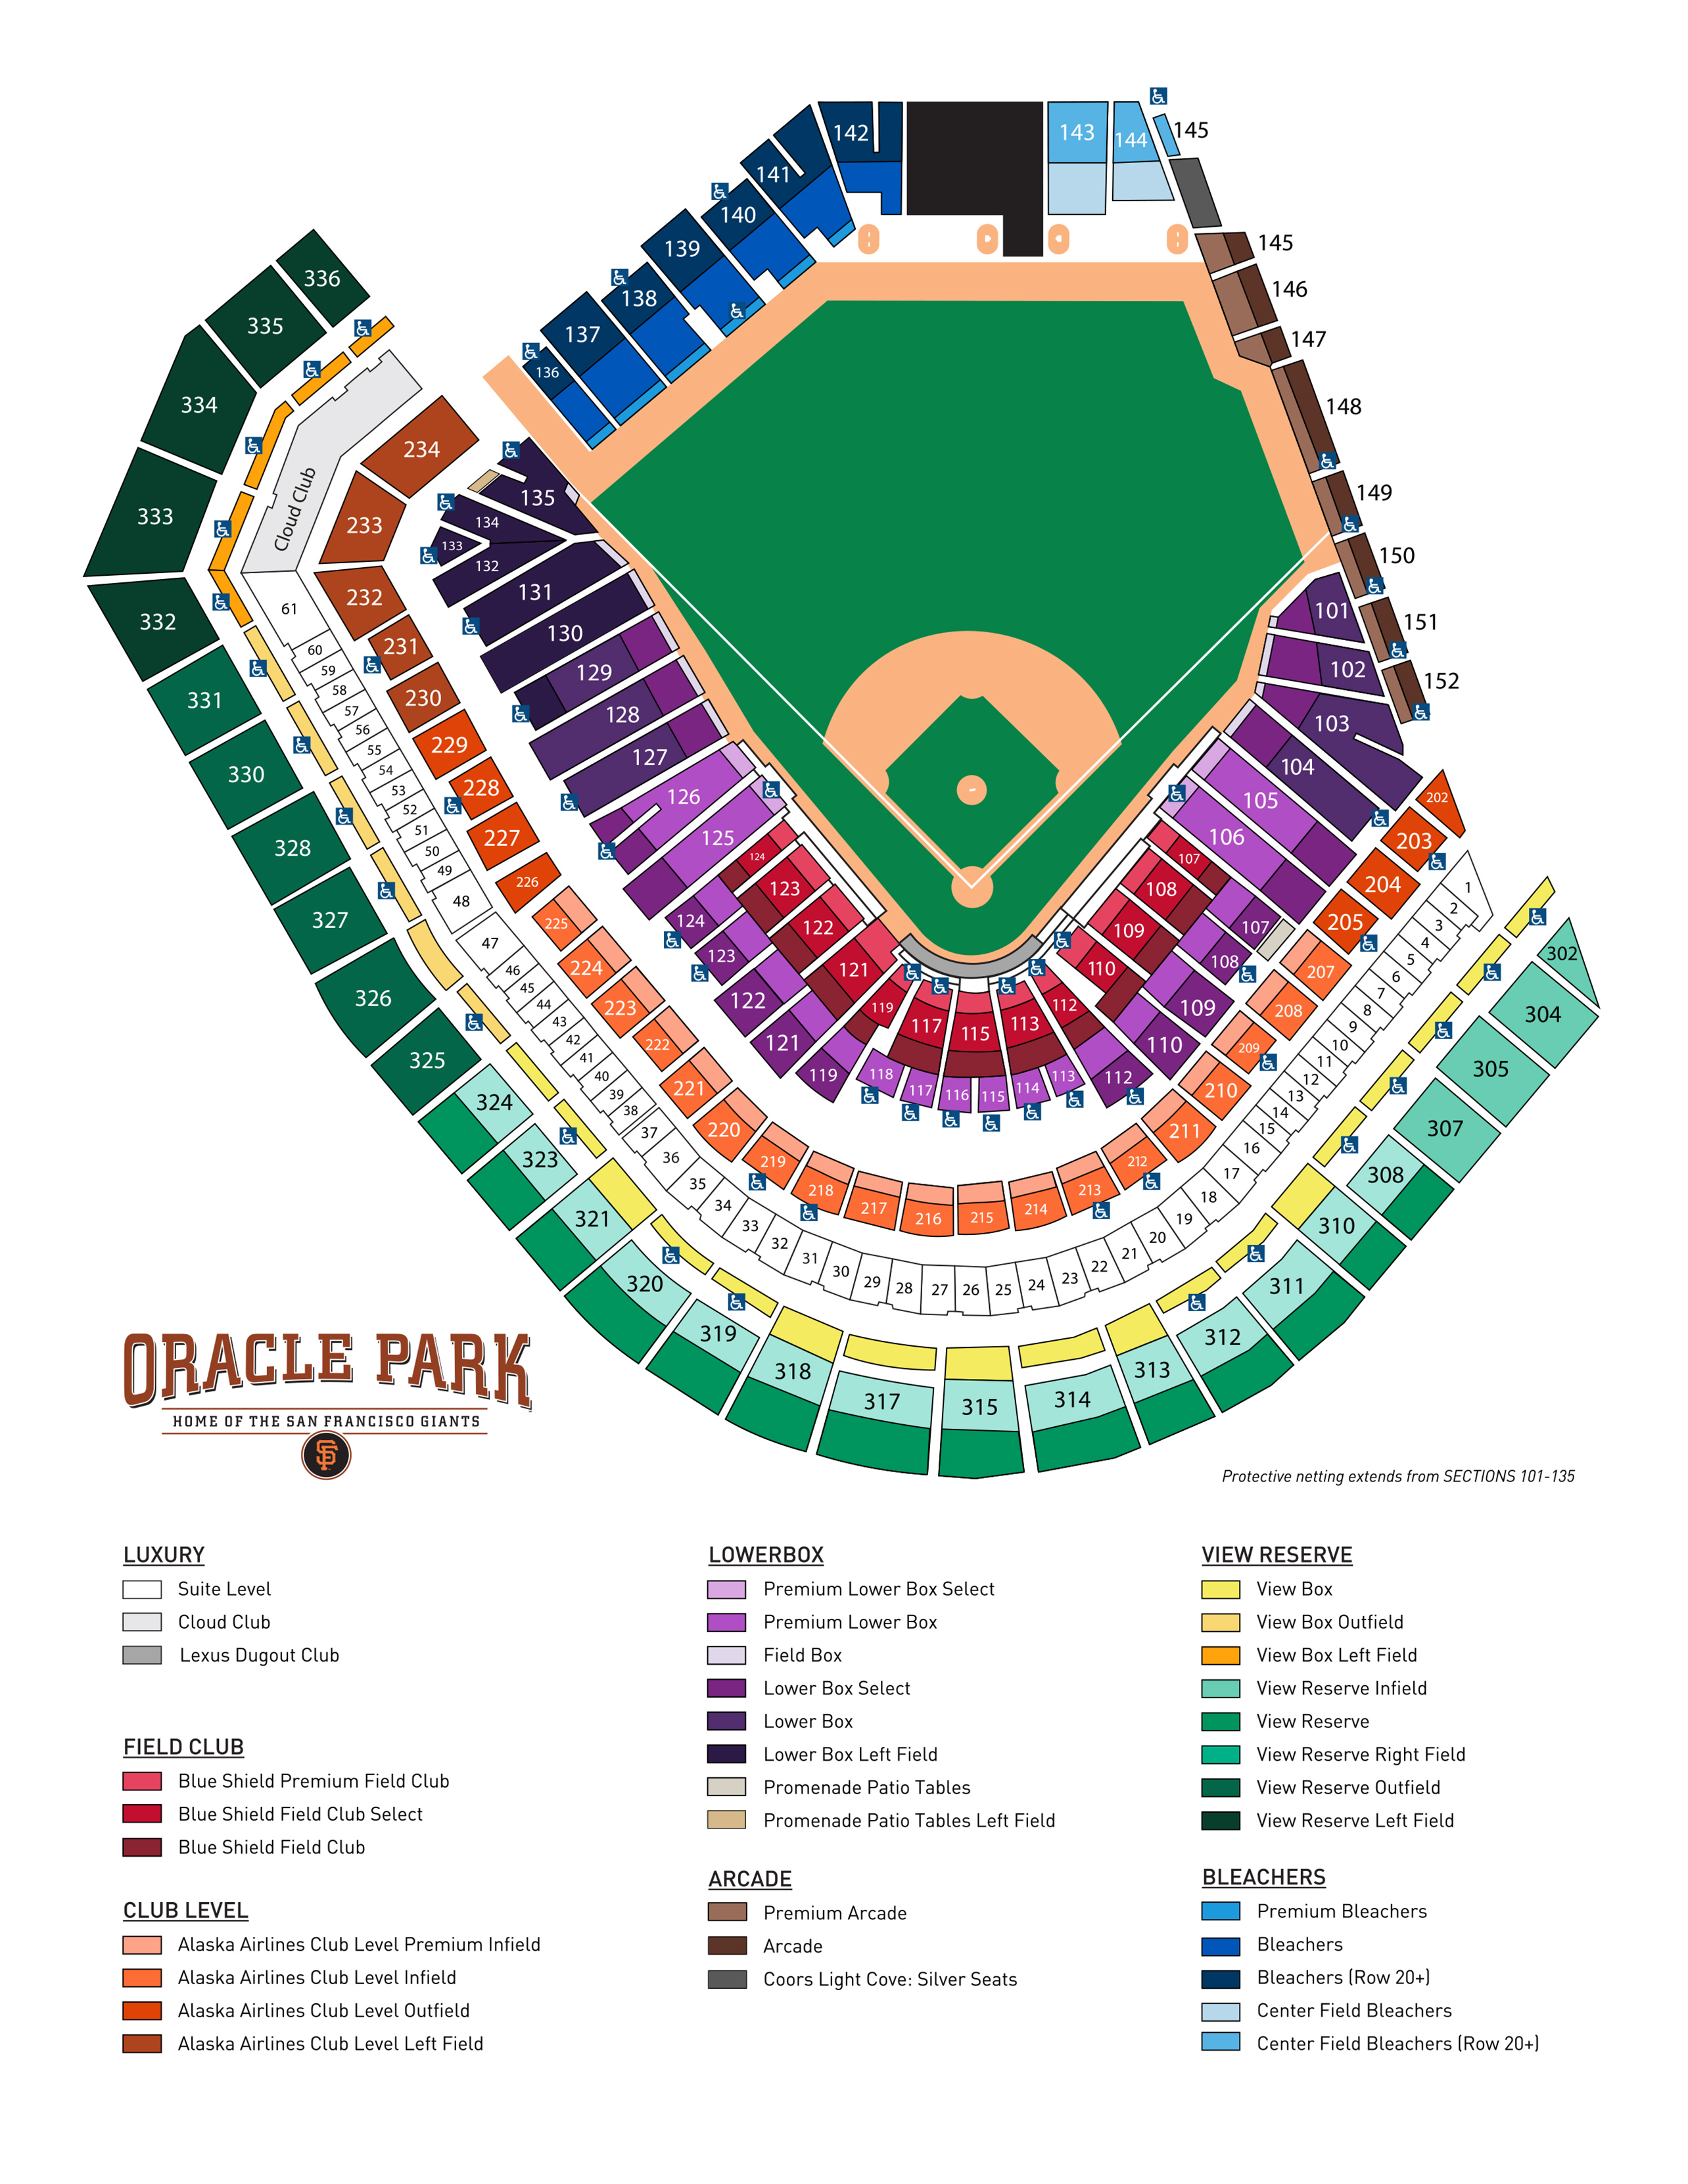 Oracle park section 101 online betting tab nsw data